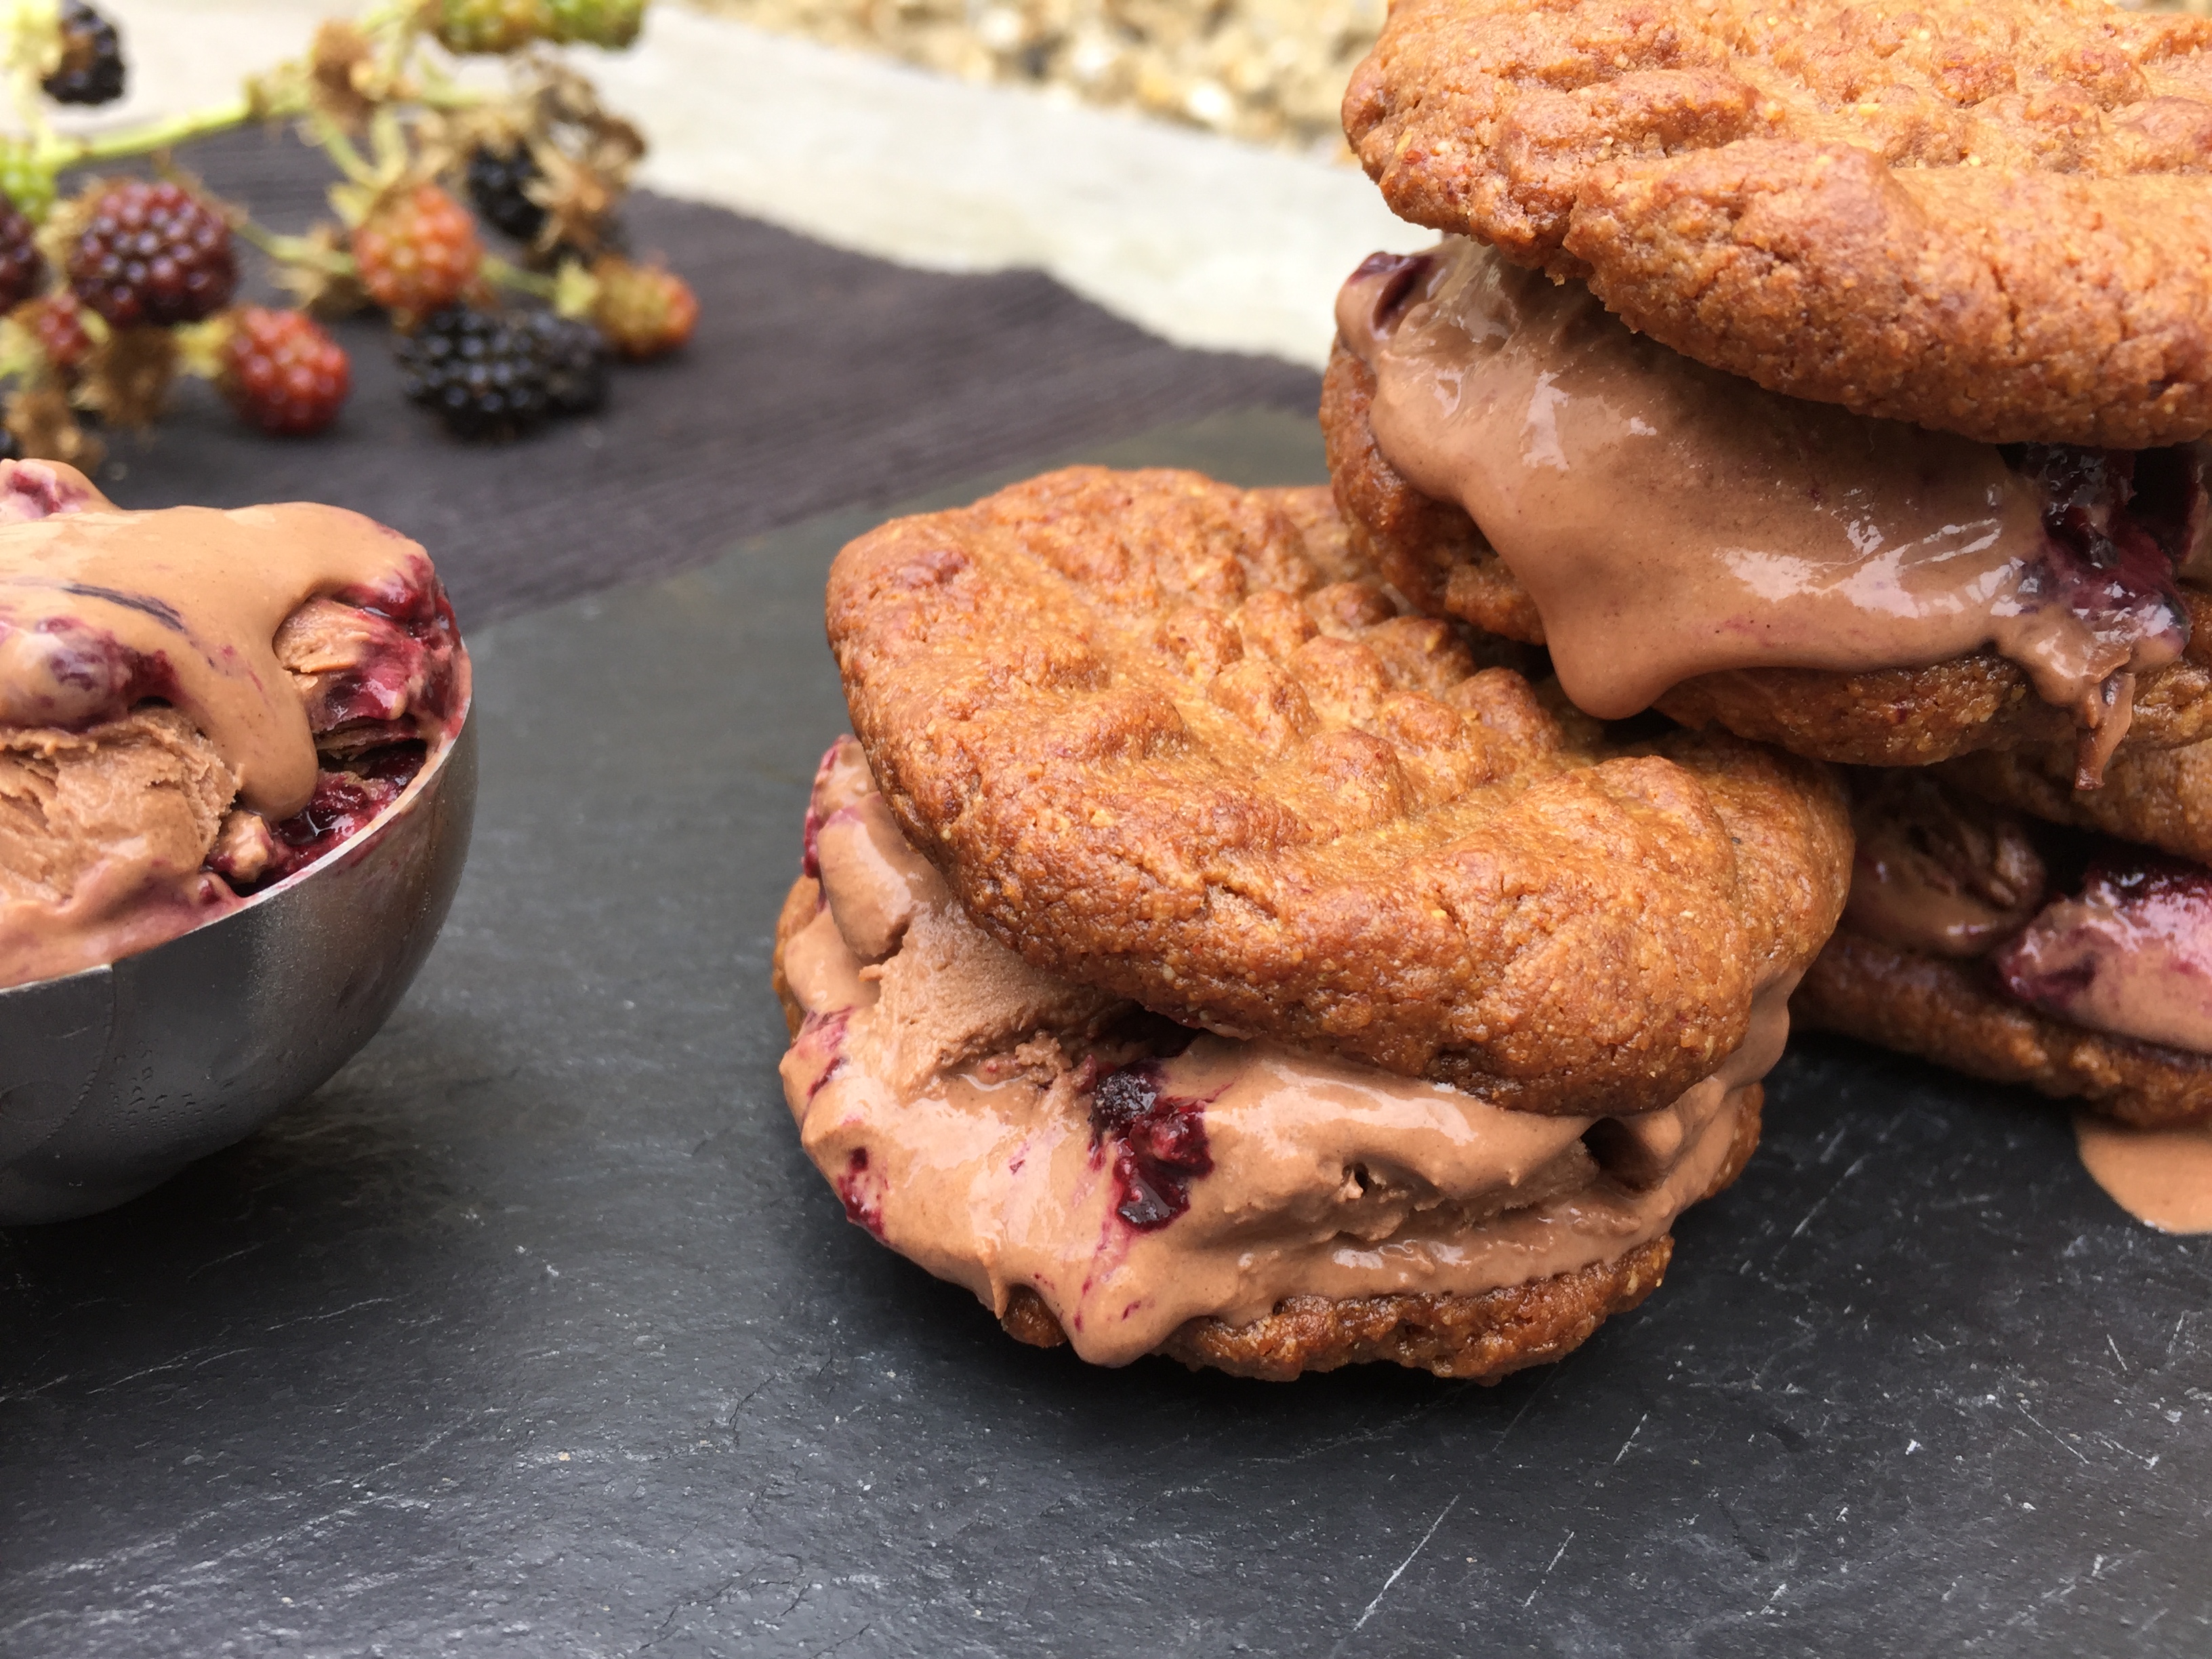 Peanut butter Chocolate and Blackberry ice-cream sandwiches